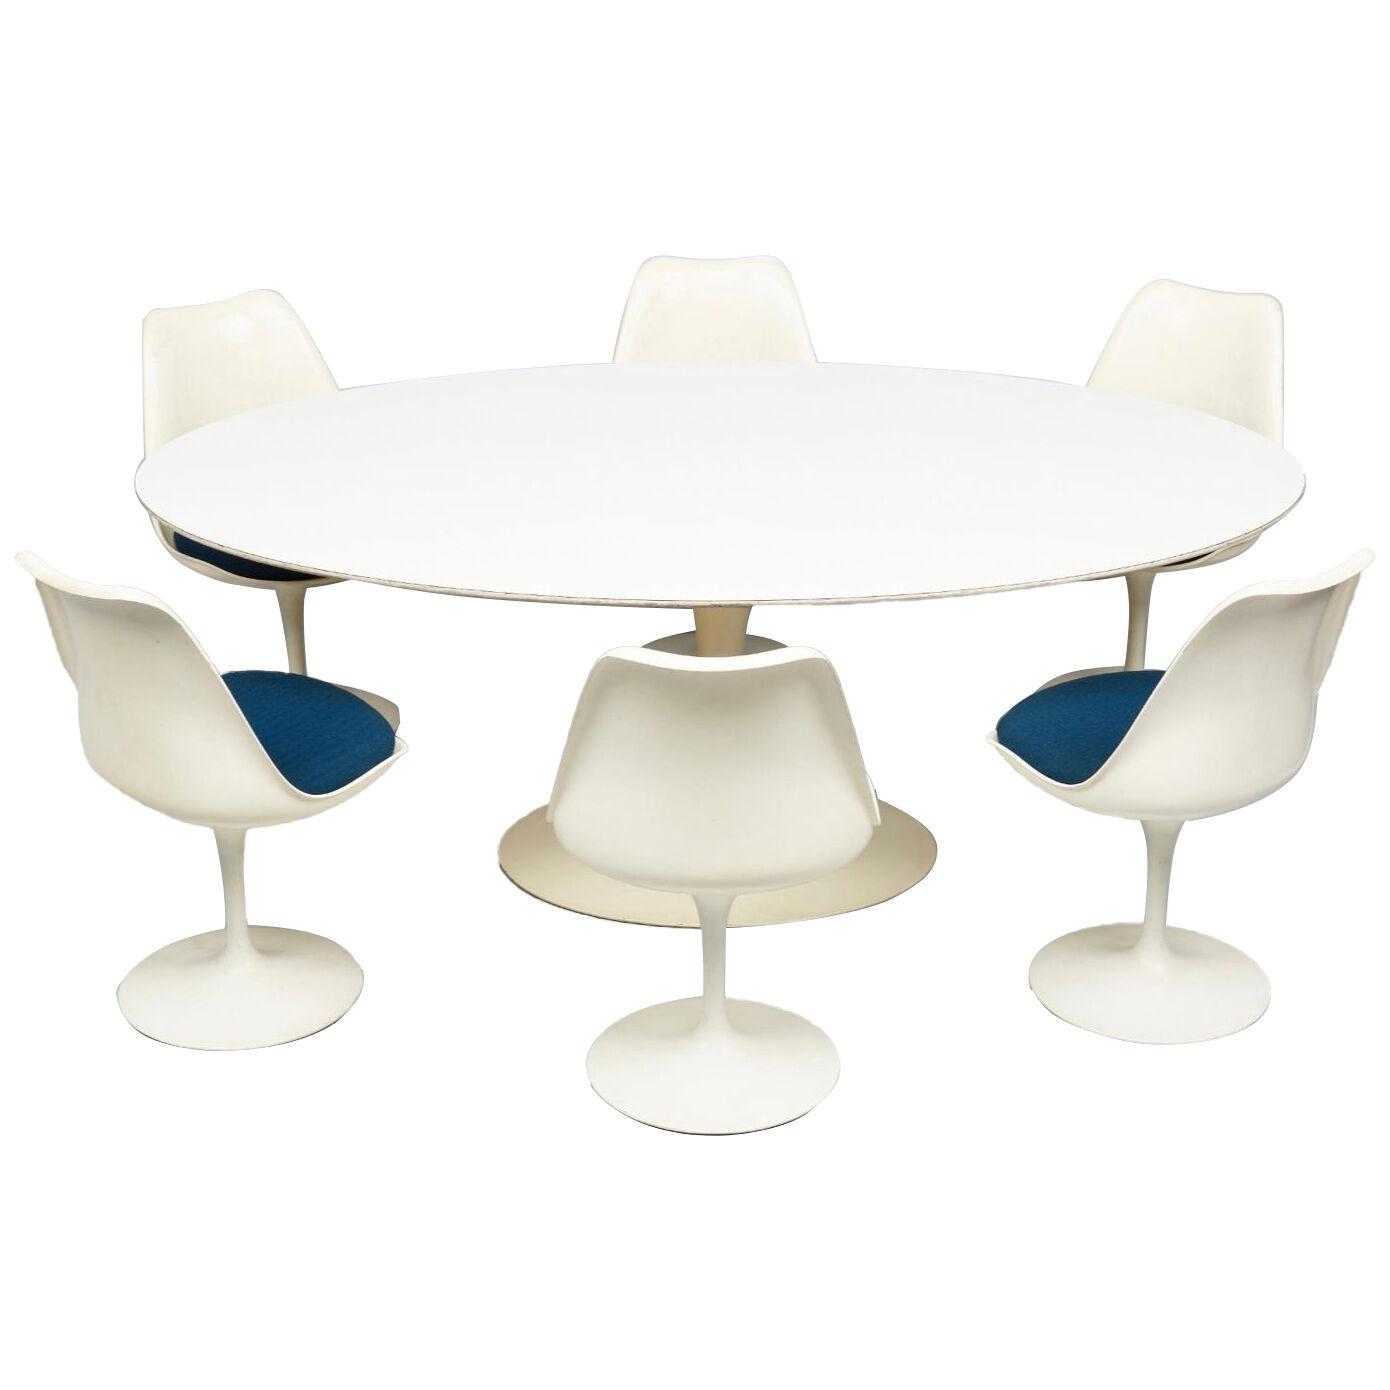 1950’s Saarinen Oval Tulip Table and Chairs